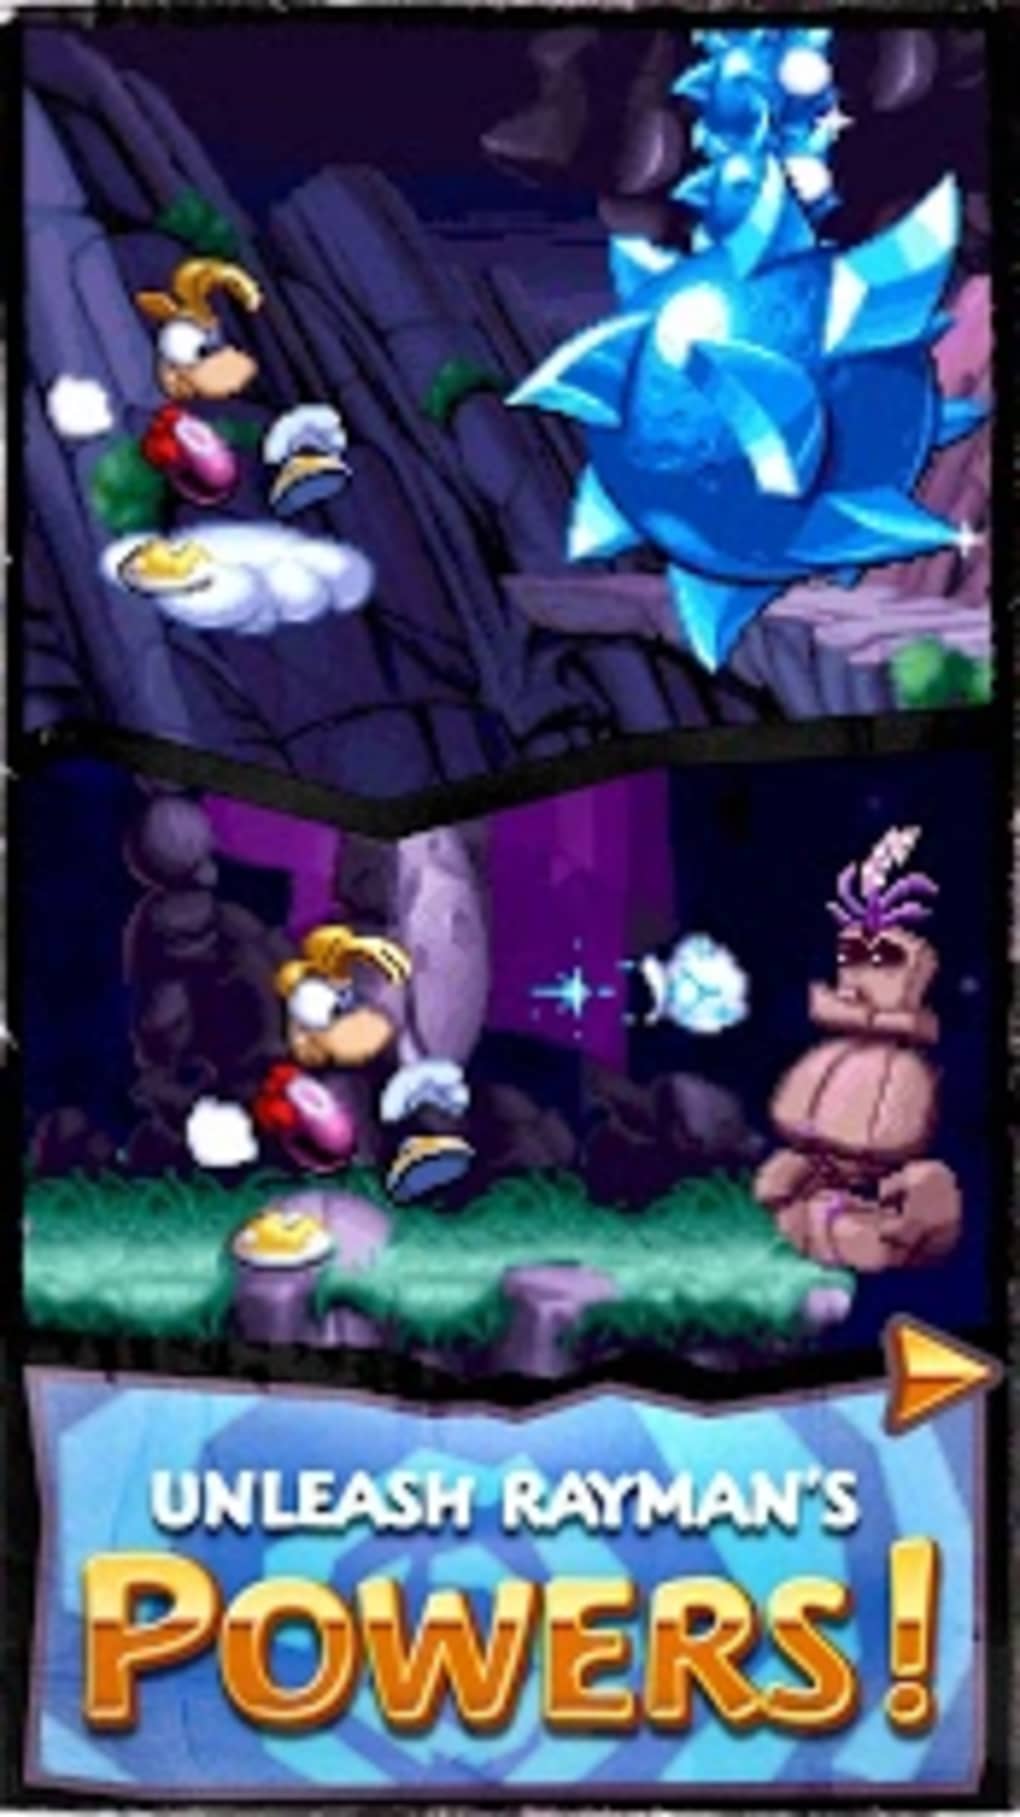 Download Rayman Classic APKs for Android - APKMirror